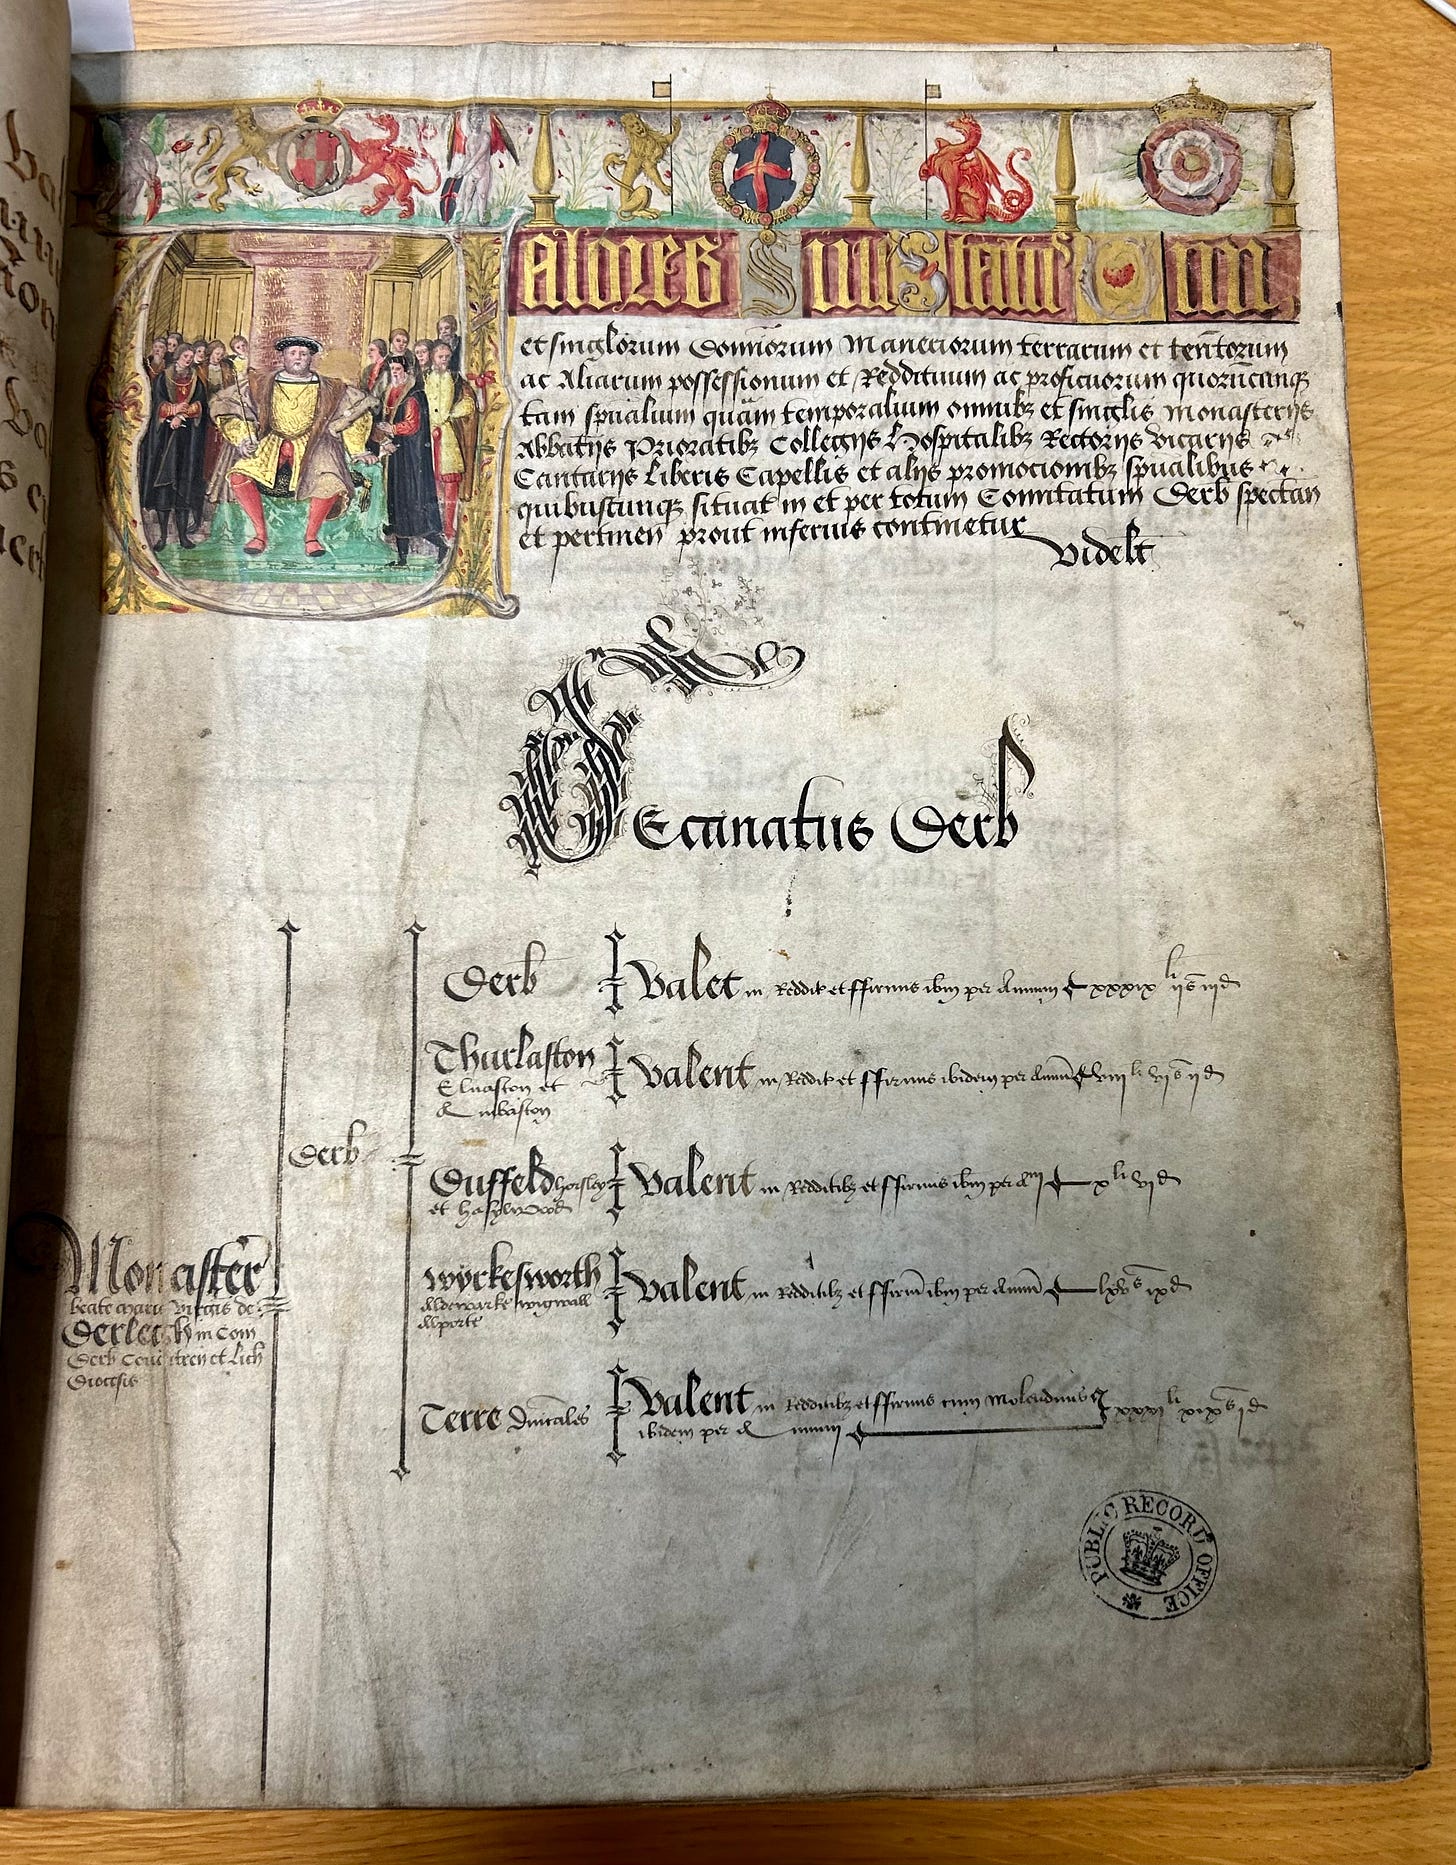 A page from a sixteenth century book. The top of the page is taken up with an illustration of Henry VIII as part of an illuminated letter V. The text is in Latin.